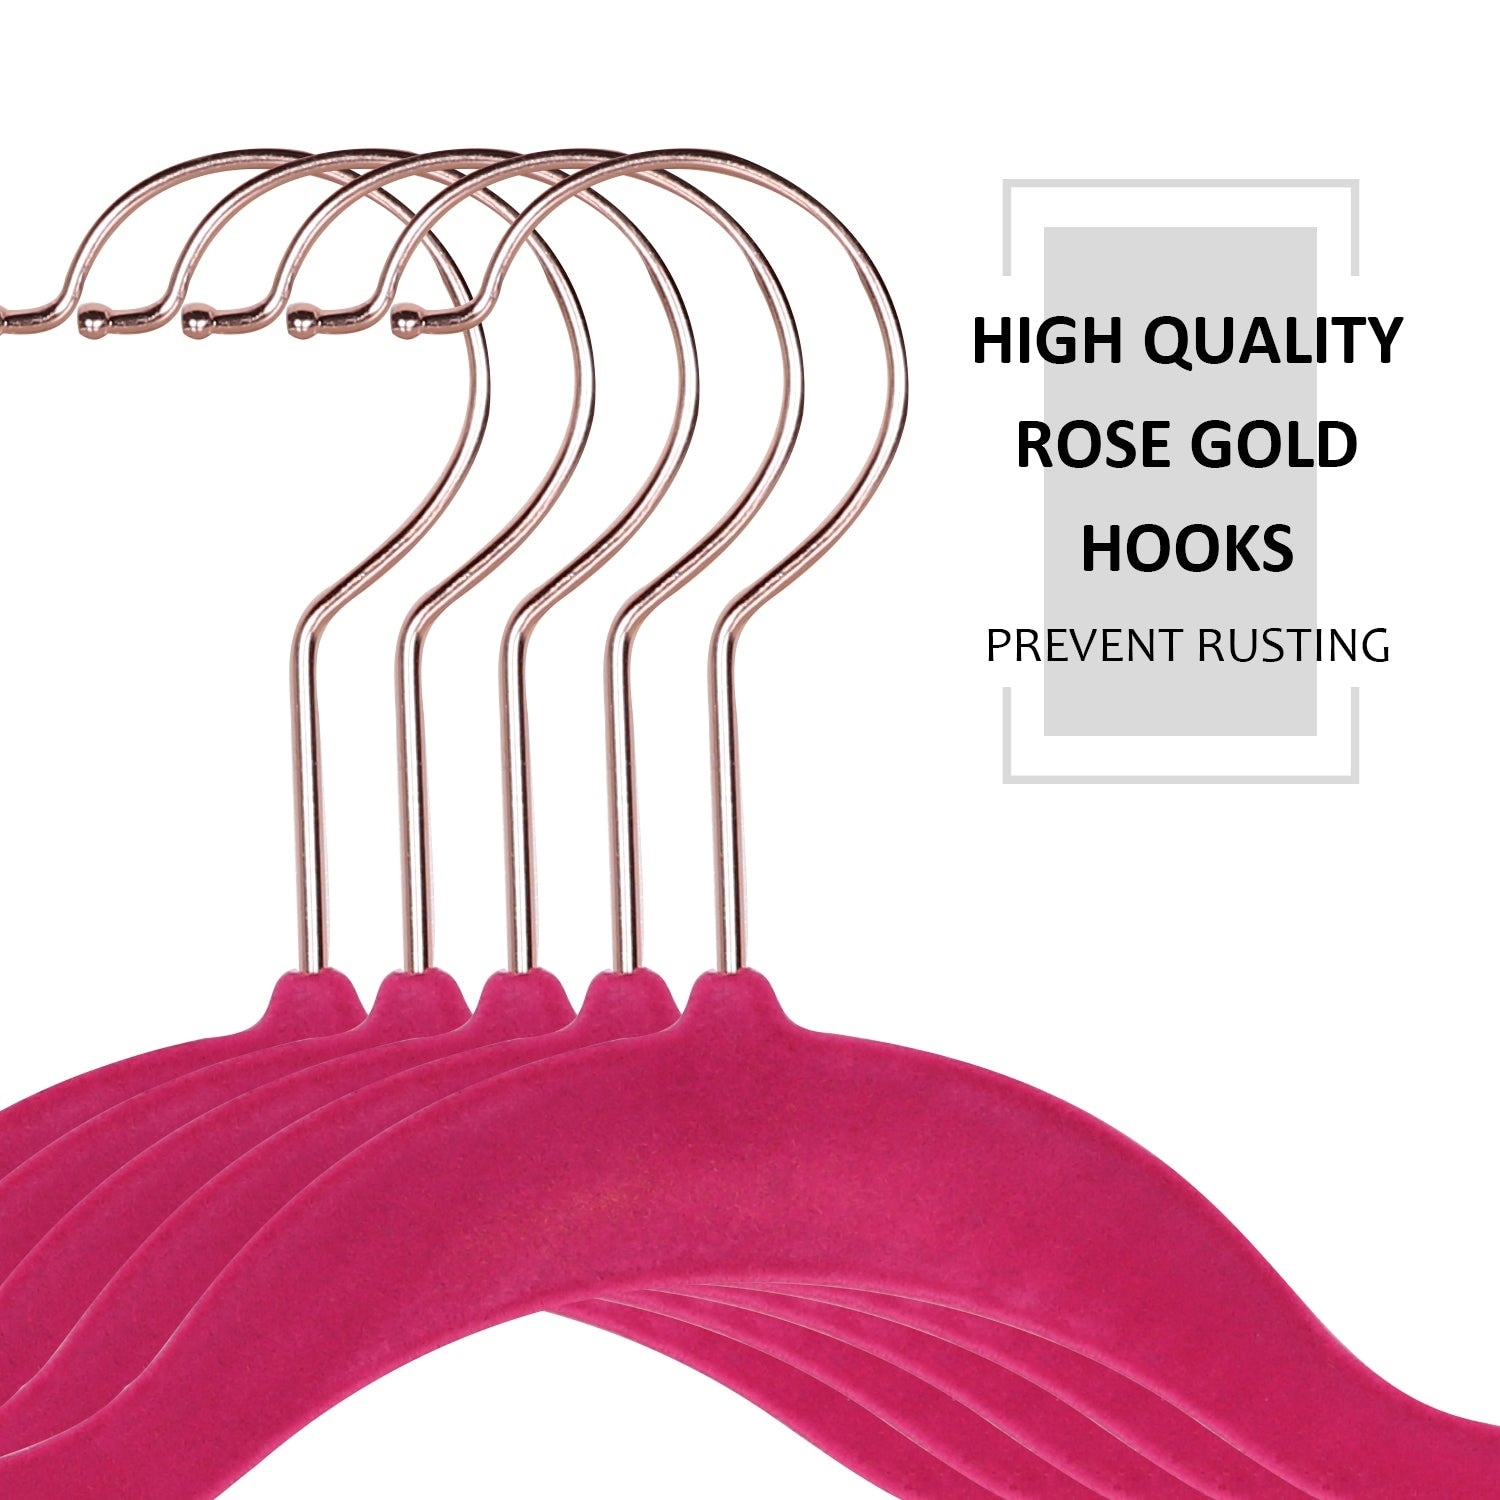 https://ak1.ostkcdn.com/images/products/is/images/direct/0ea6632ed6ed8c50a1af1622fcfb99fb6f3108f9/Premium-Space-Saving-Velvet-Hangers-Holds-Up-To-10-Lbs%2850-100-Packs-Option%29.jpg